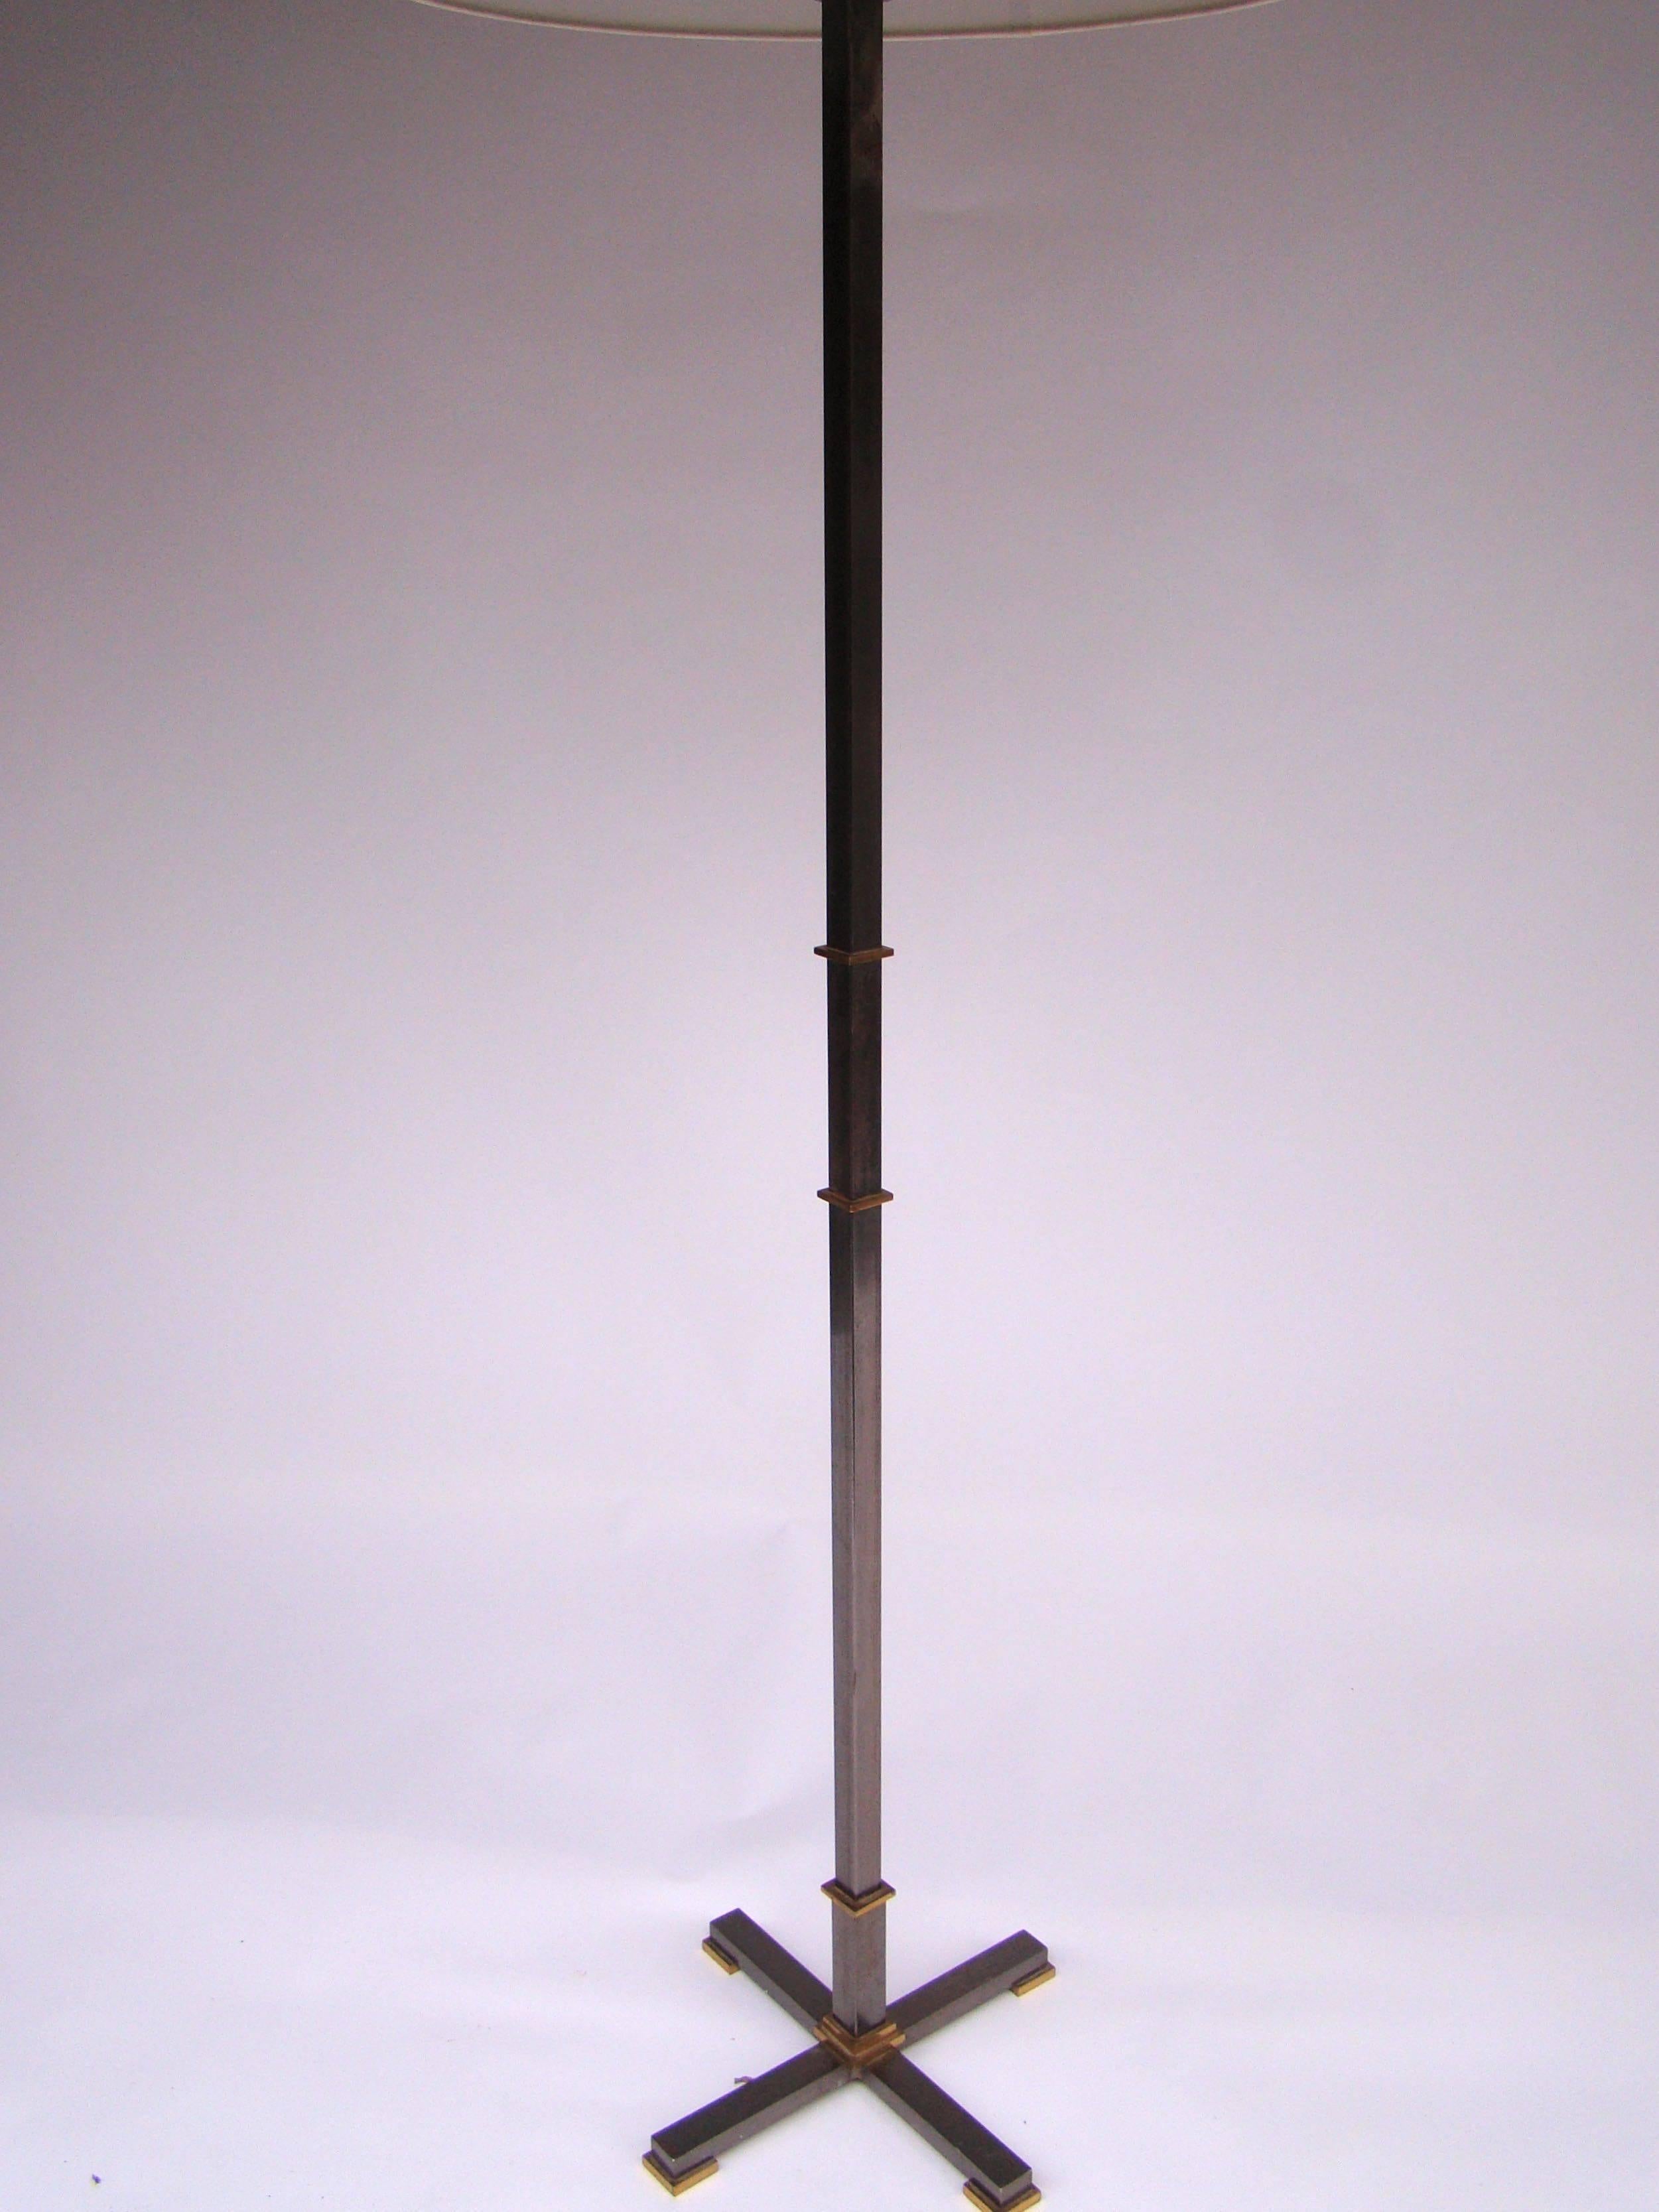 Handsome French floor lamp in steel and bronze by Maison Jansen, circa 1960.